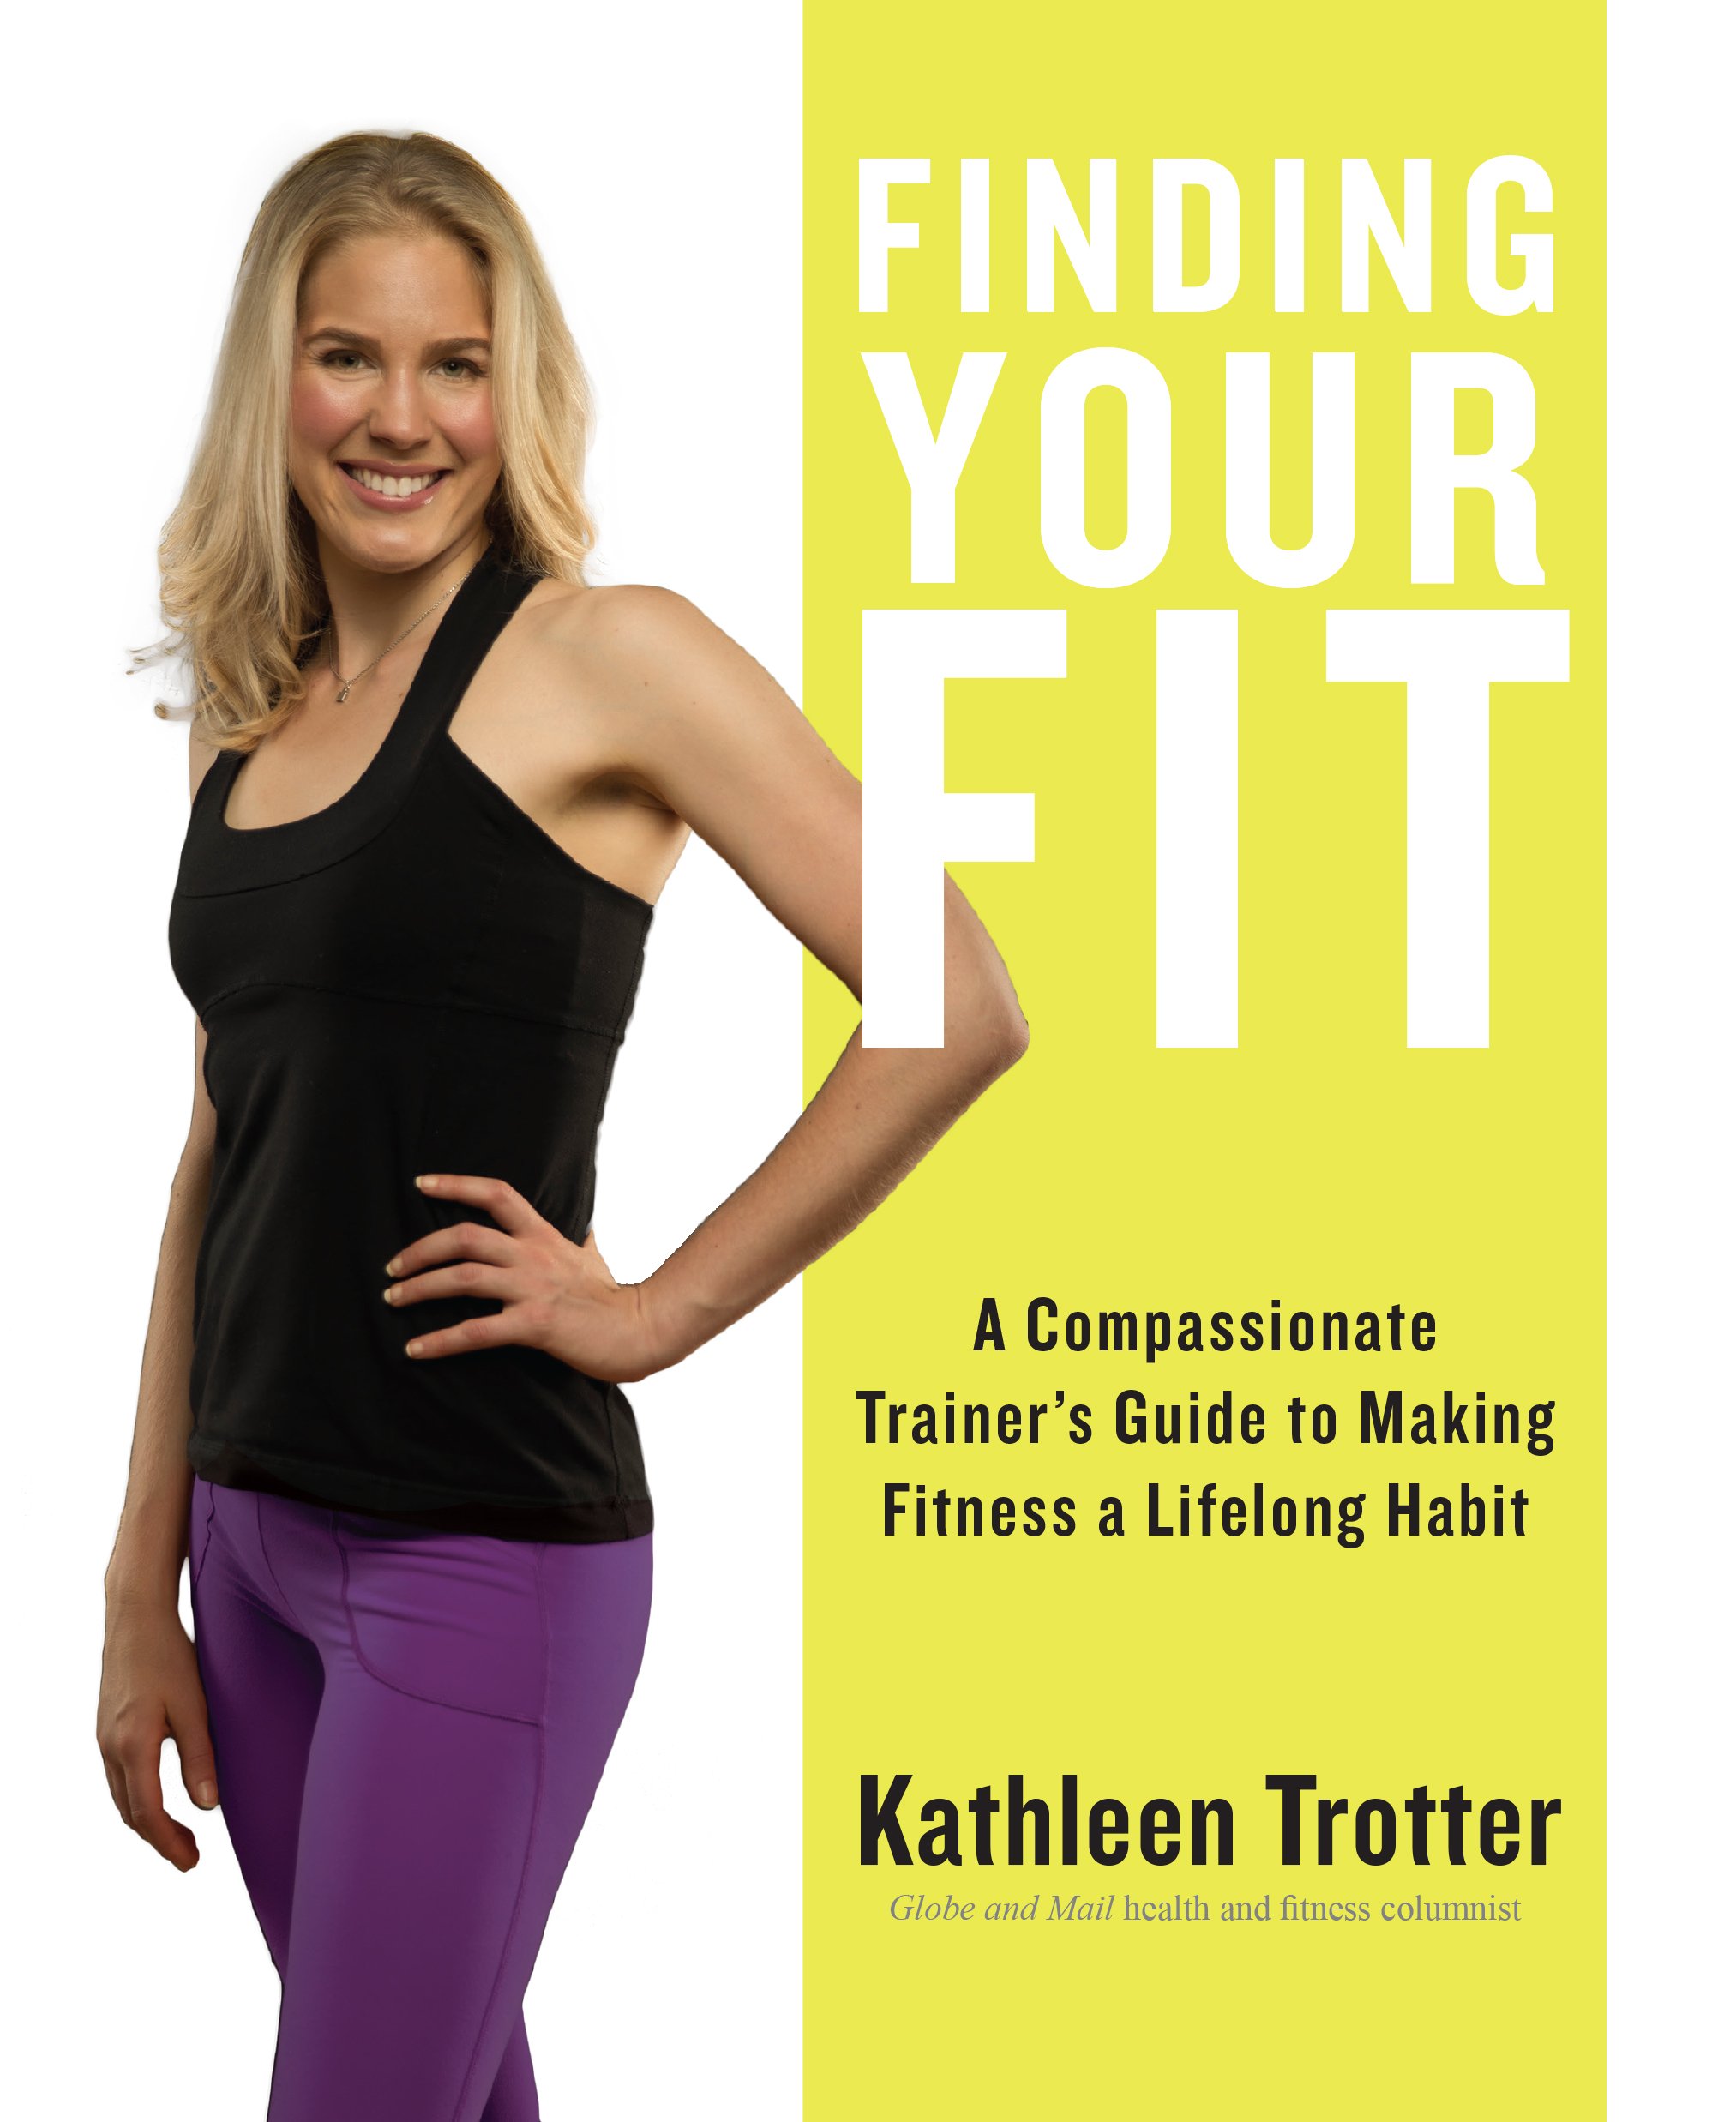 Finding Your Fit: A Compassionate Trainer's Guide to Making Fitness a  Lifelong Habit - Kathleen Trotterâ€“Personal trainer, author, speaker